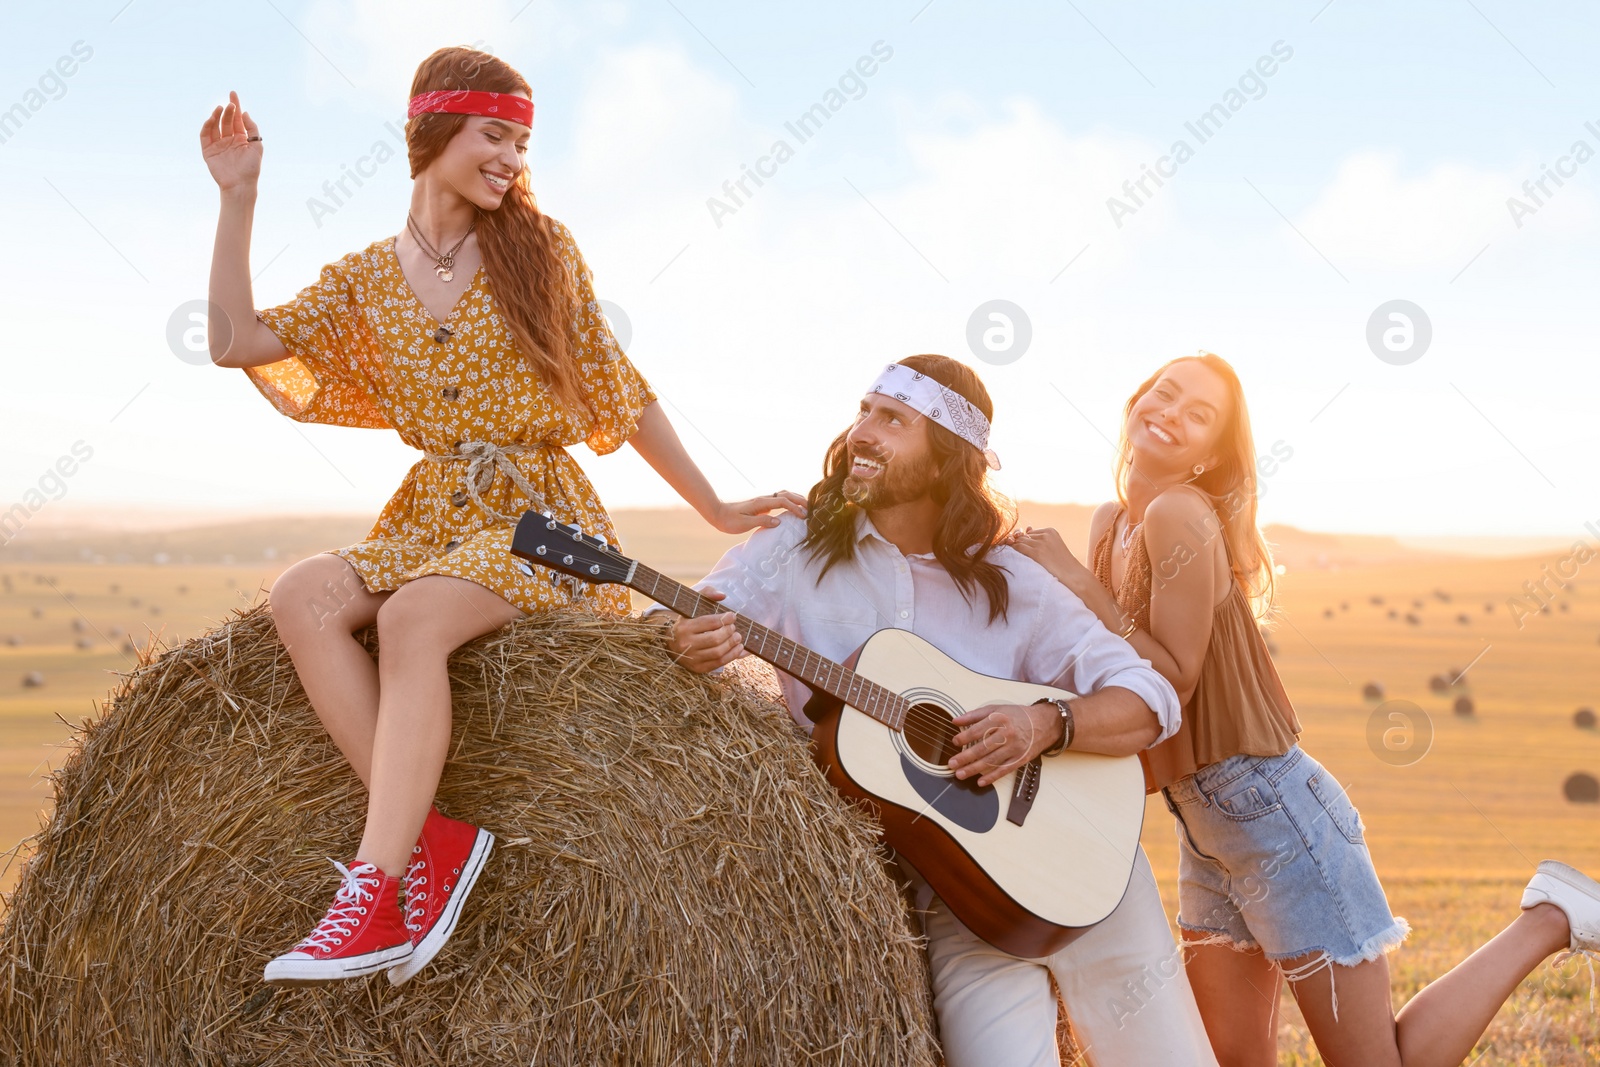 Photo of Beautiful hippie women listening to their friend playing guitar in field